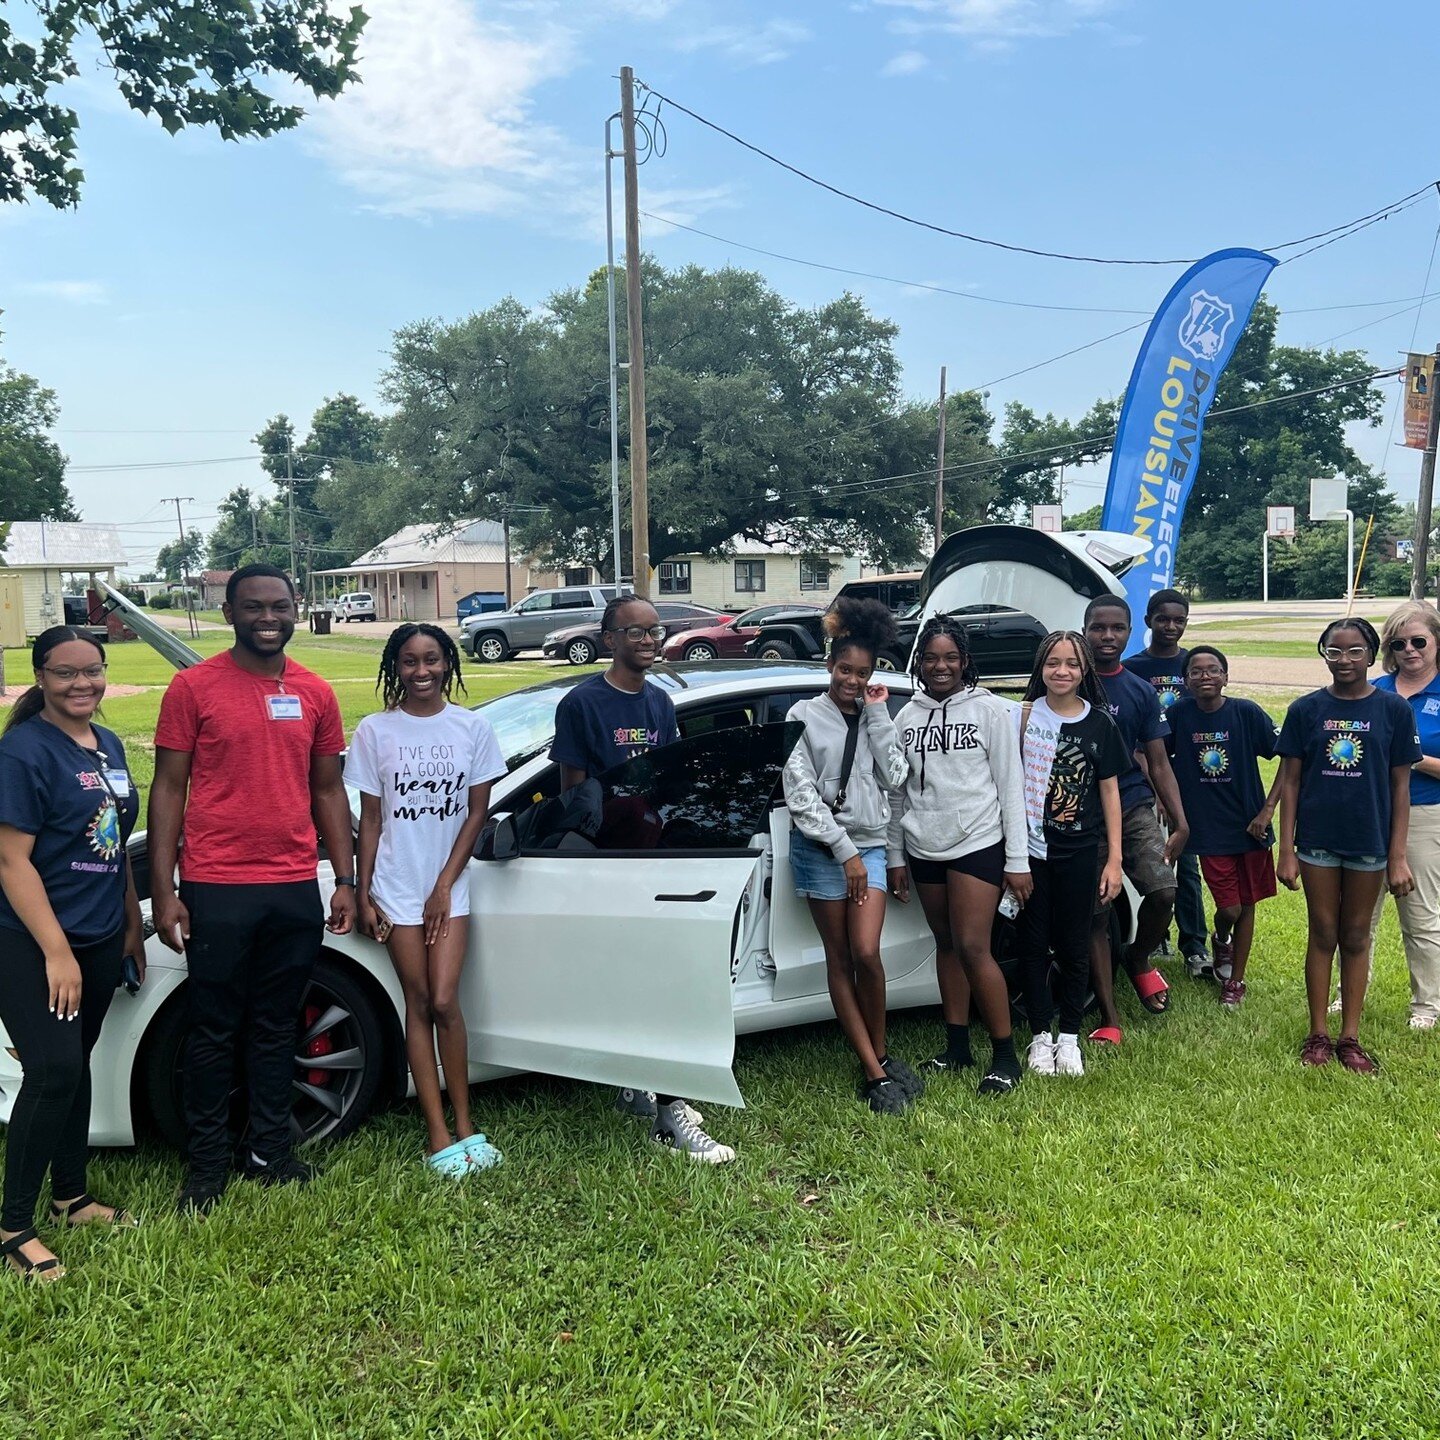 Community Sisterhood camp director Mrs Darville held a engaging STEM camp at the river road African American history museum in Donaldsonville LA today, 6/22.
Mayor Sullivan joined us to meet with the kids and view the EV loaned by Gerry Lane Automoti